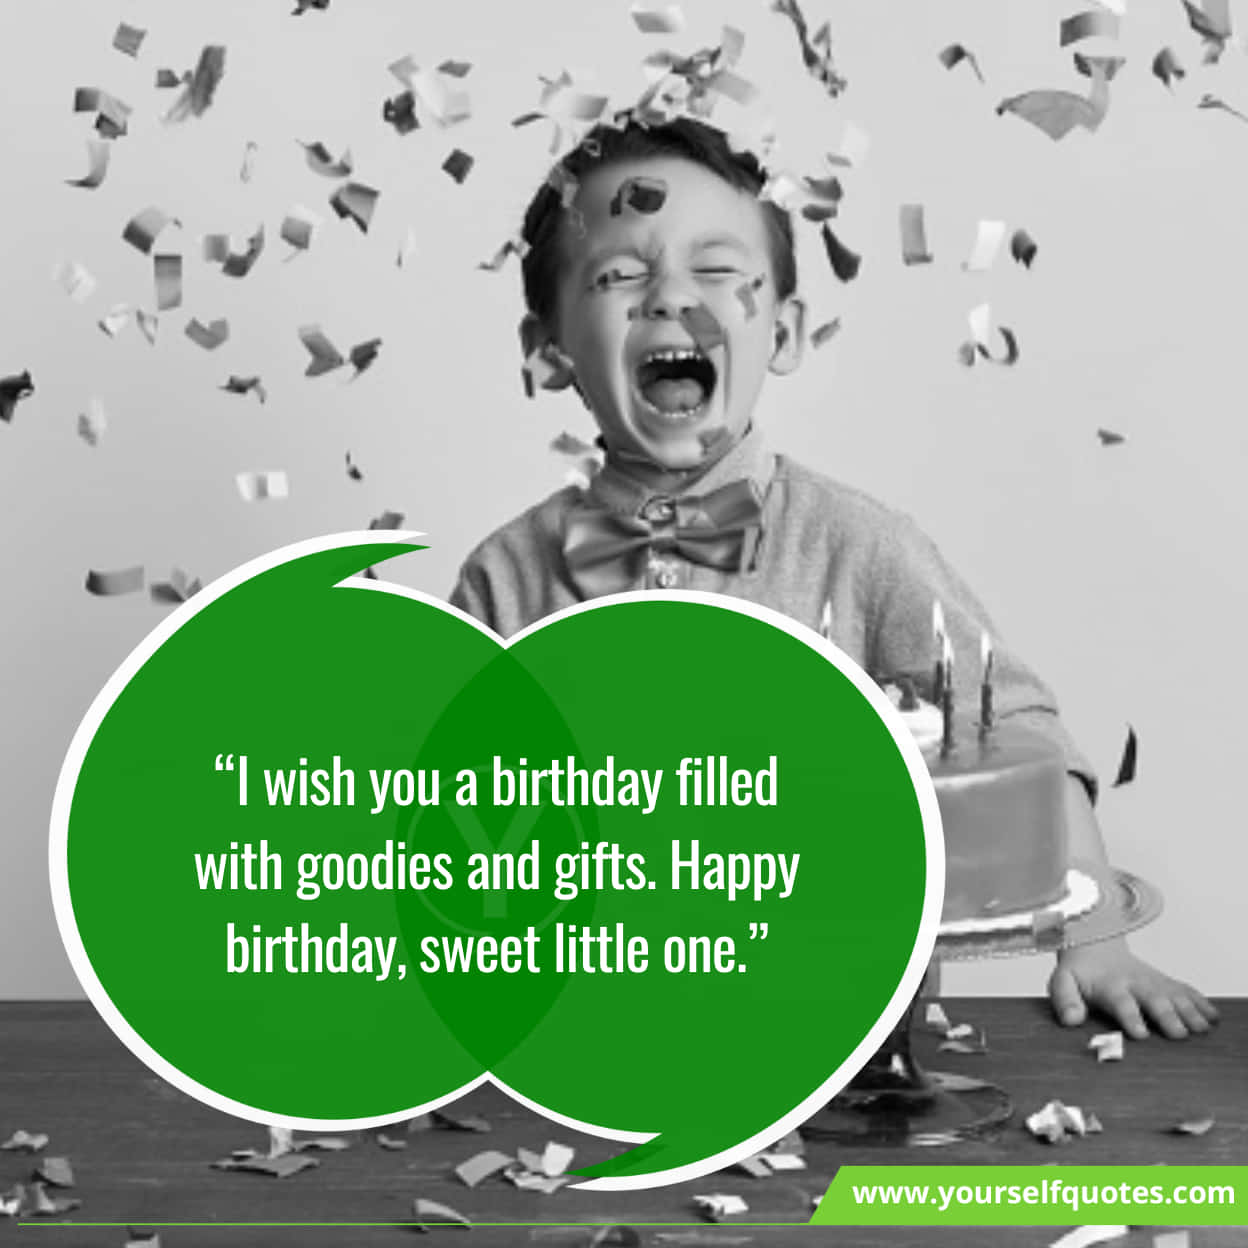 Most Amazing Happy Birthday Wishes for Kids